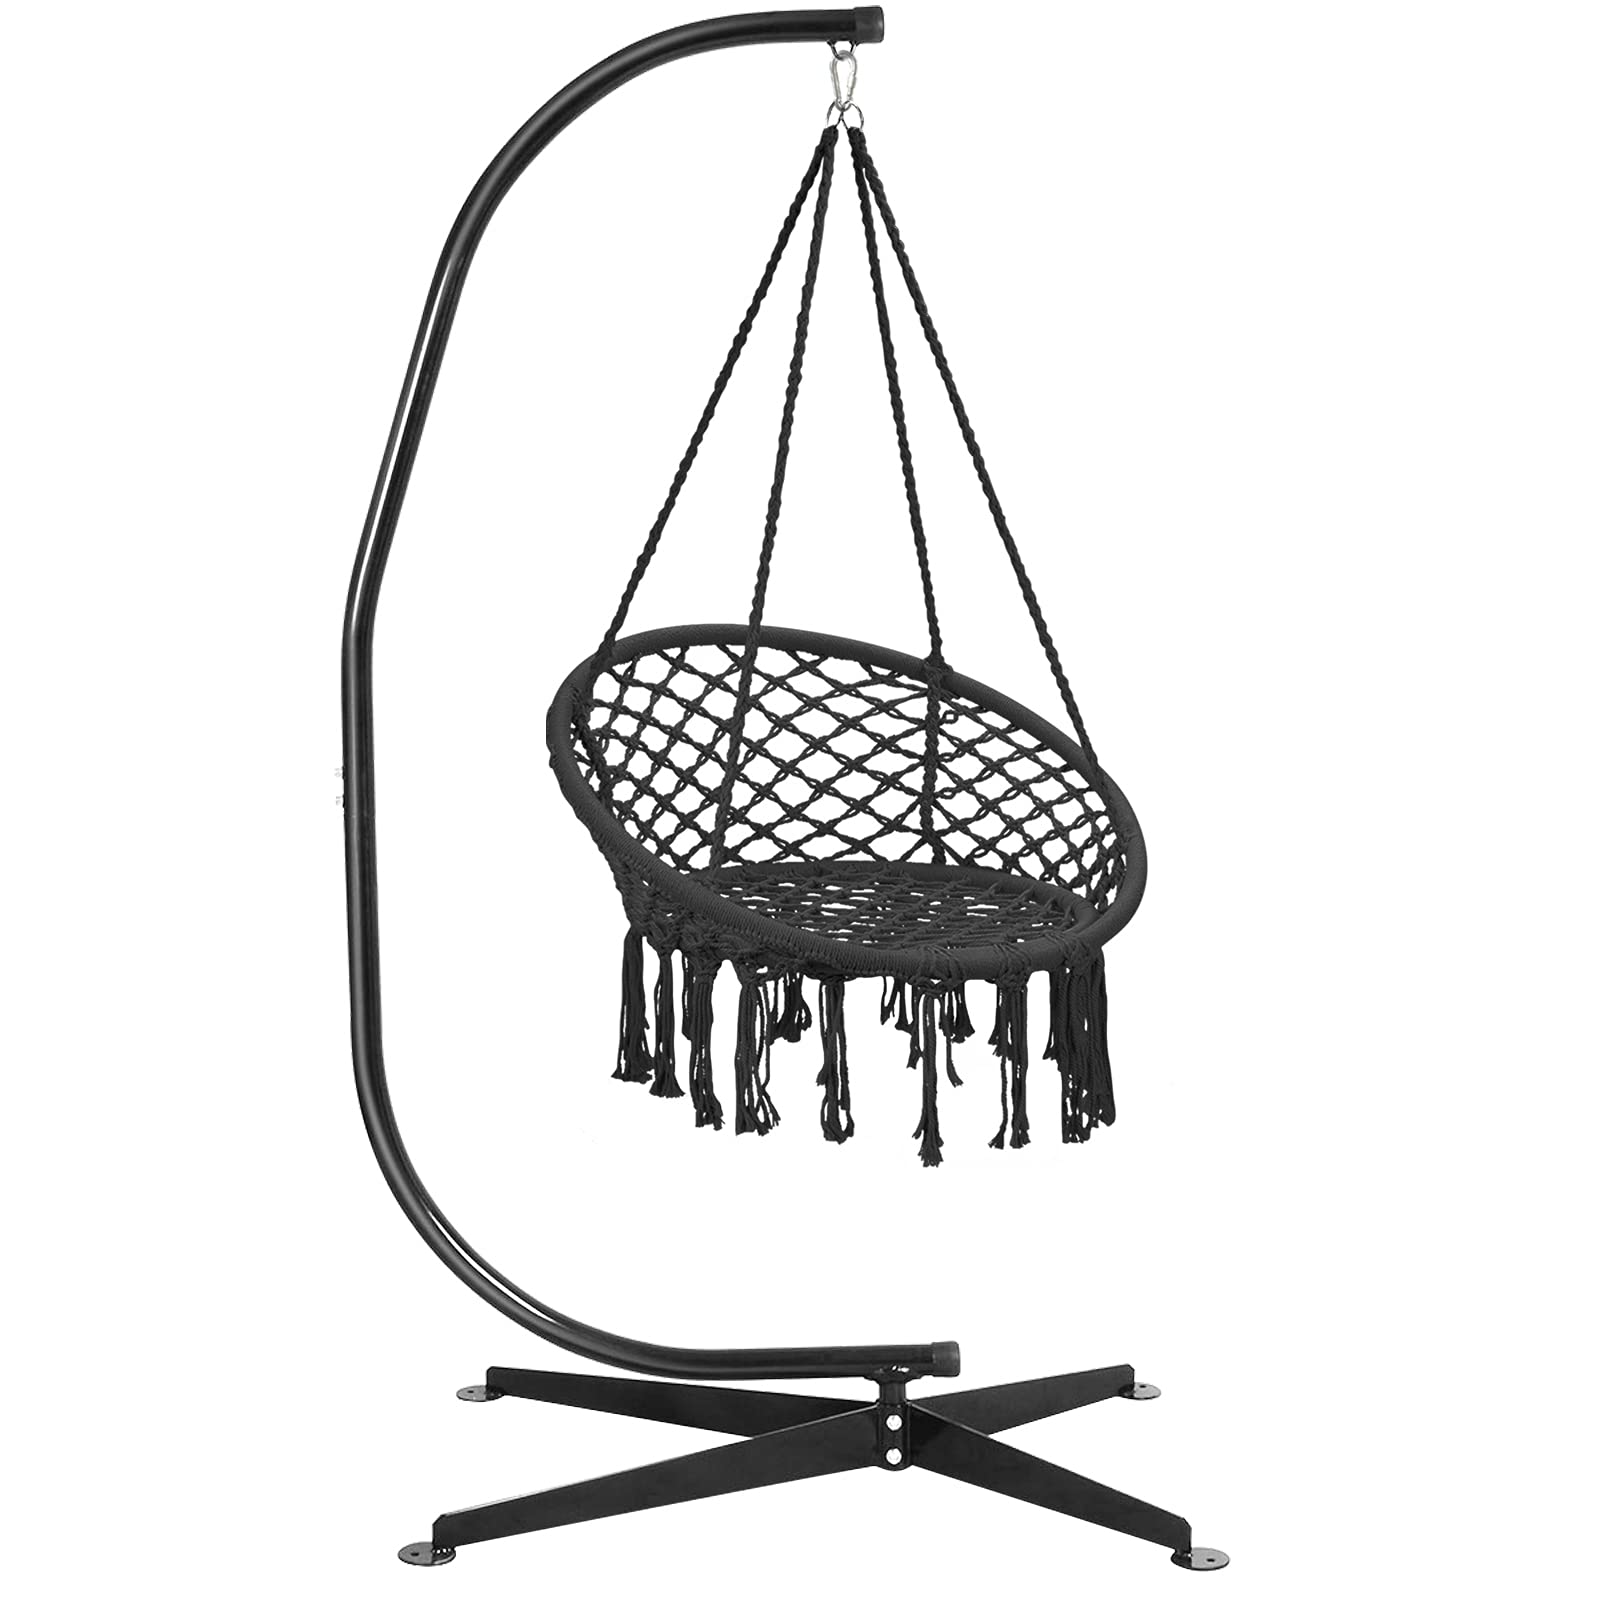 Giantex Hammock Chair with Stand, Solid Steel Heavy Duty C Stand with Macrame Hanging Chair